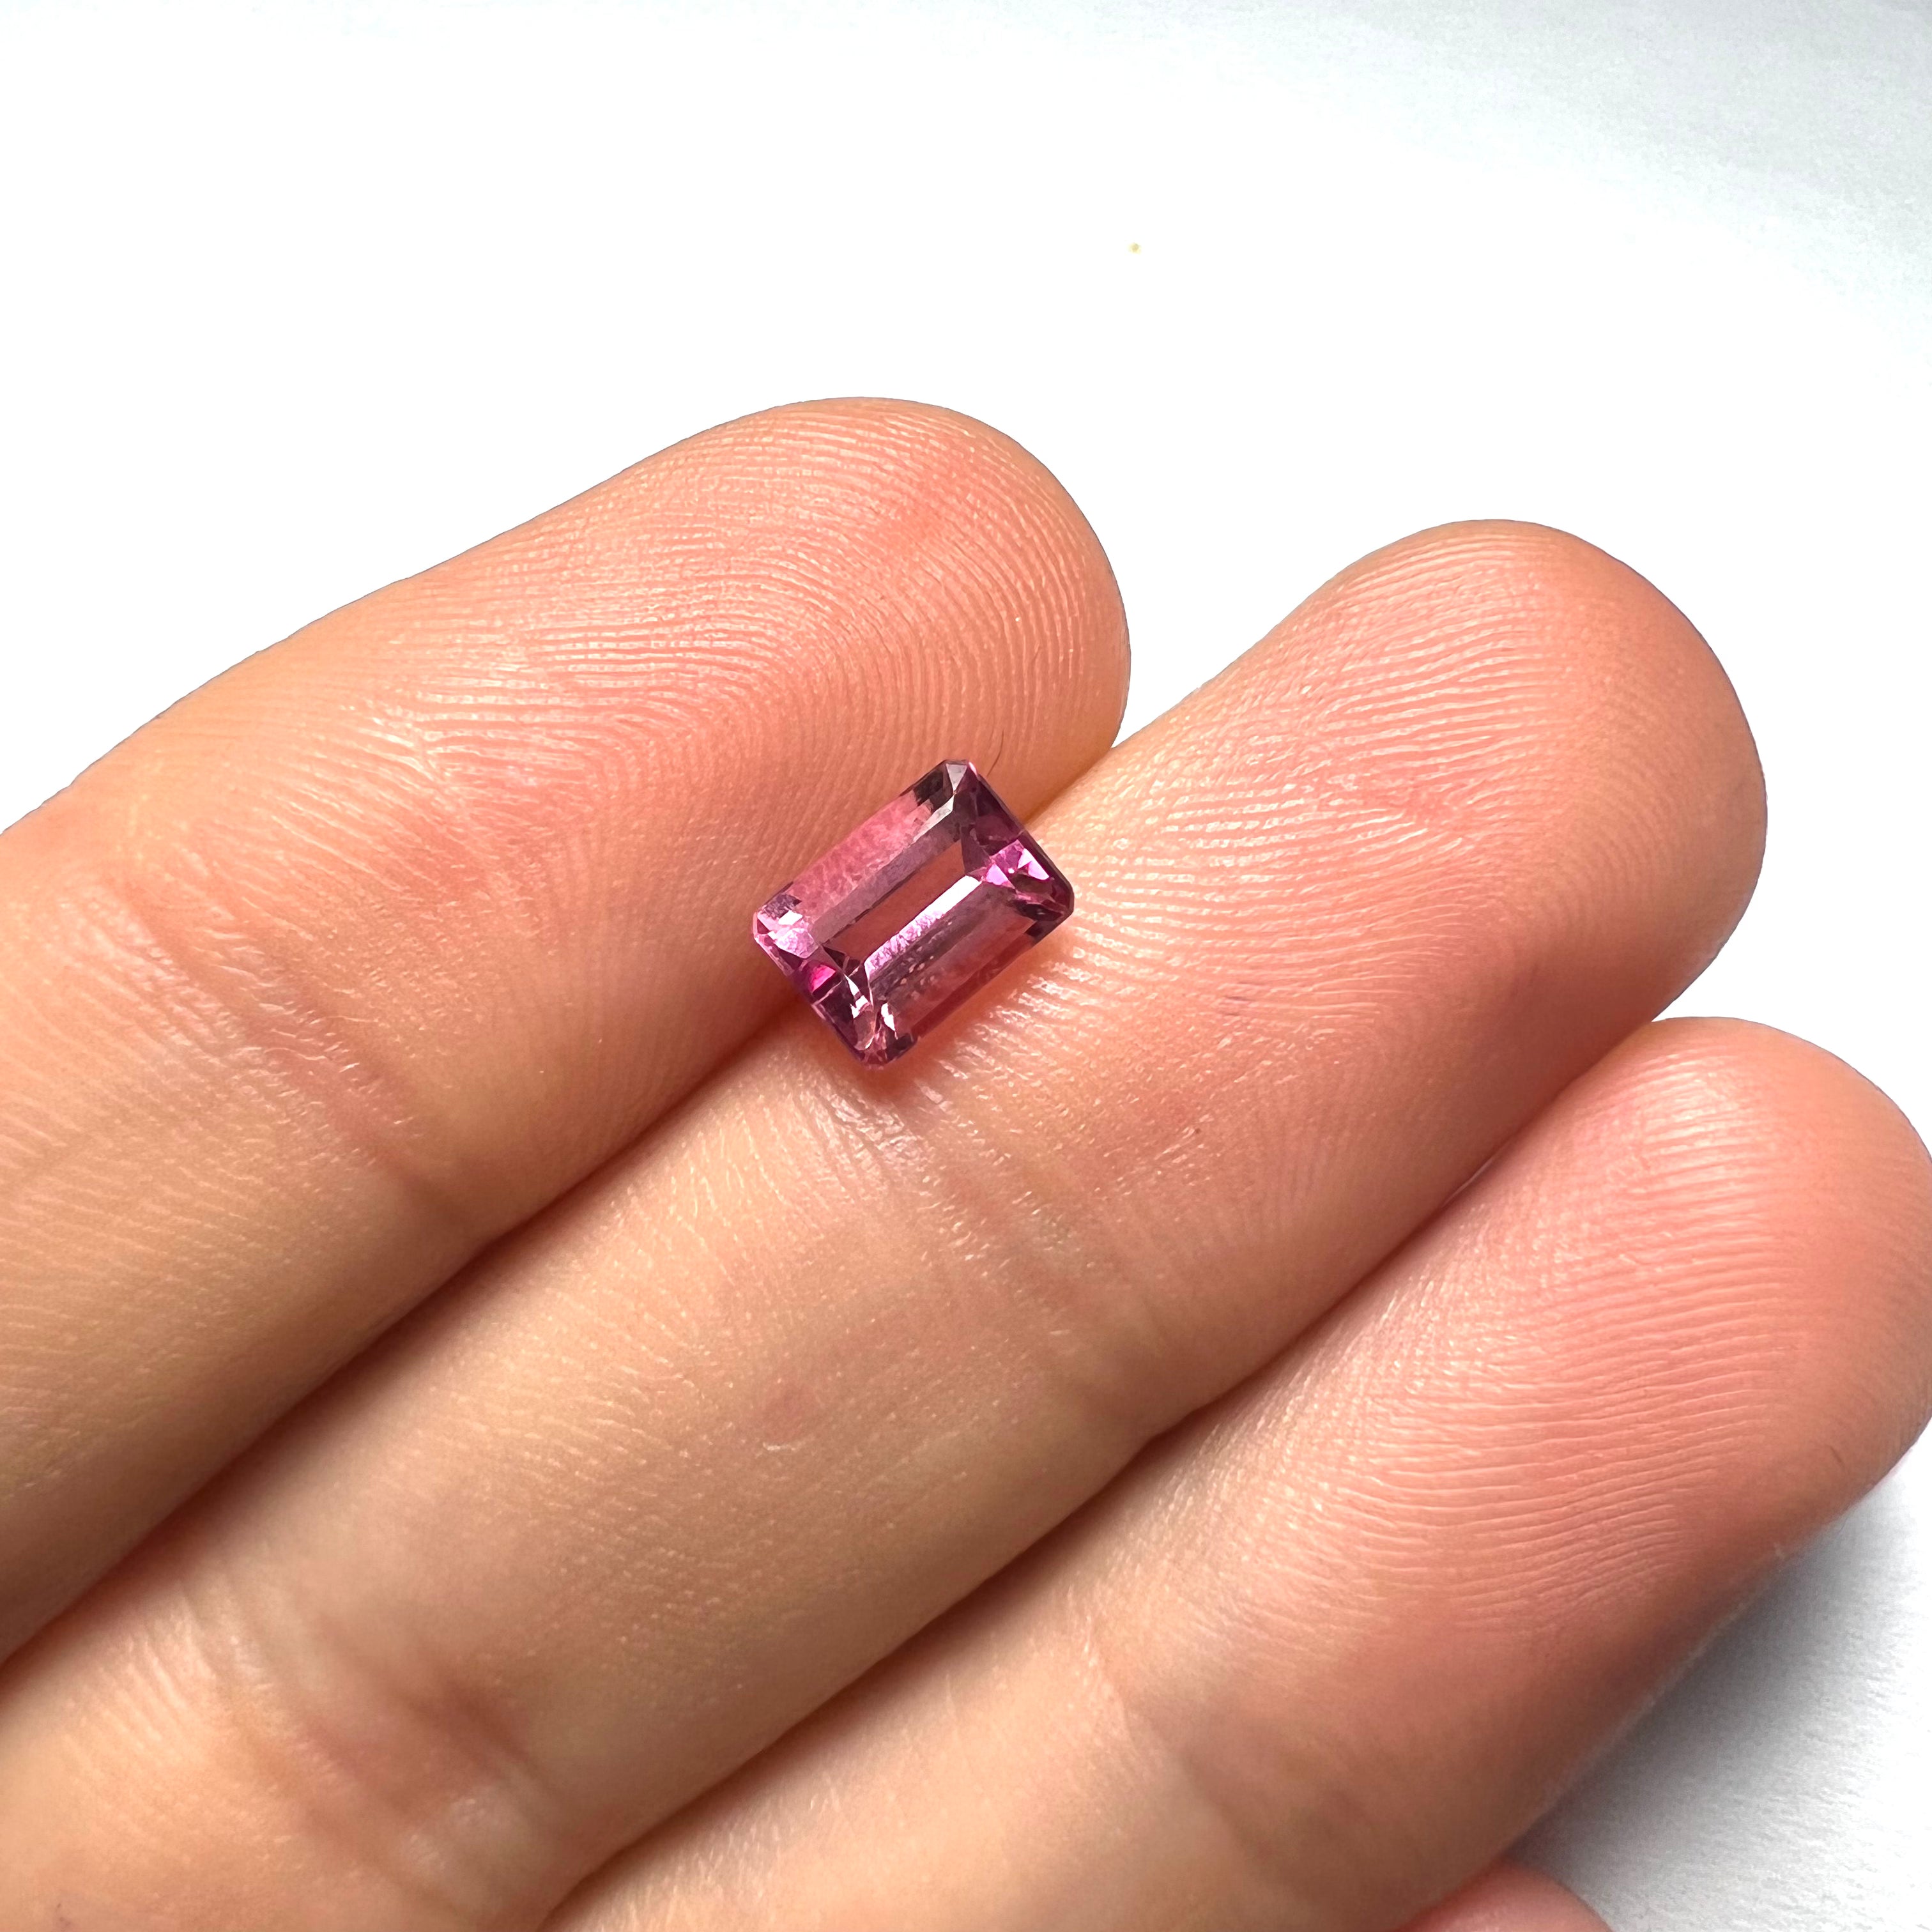 1.08CTW Natural Pink Rectangle Tourmaline 6x5x4mm Earth mined Gemstone